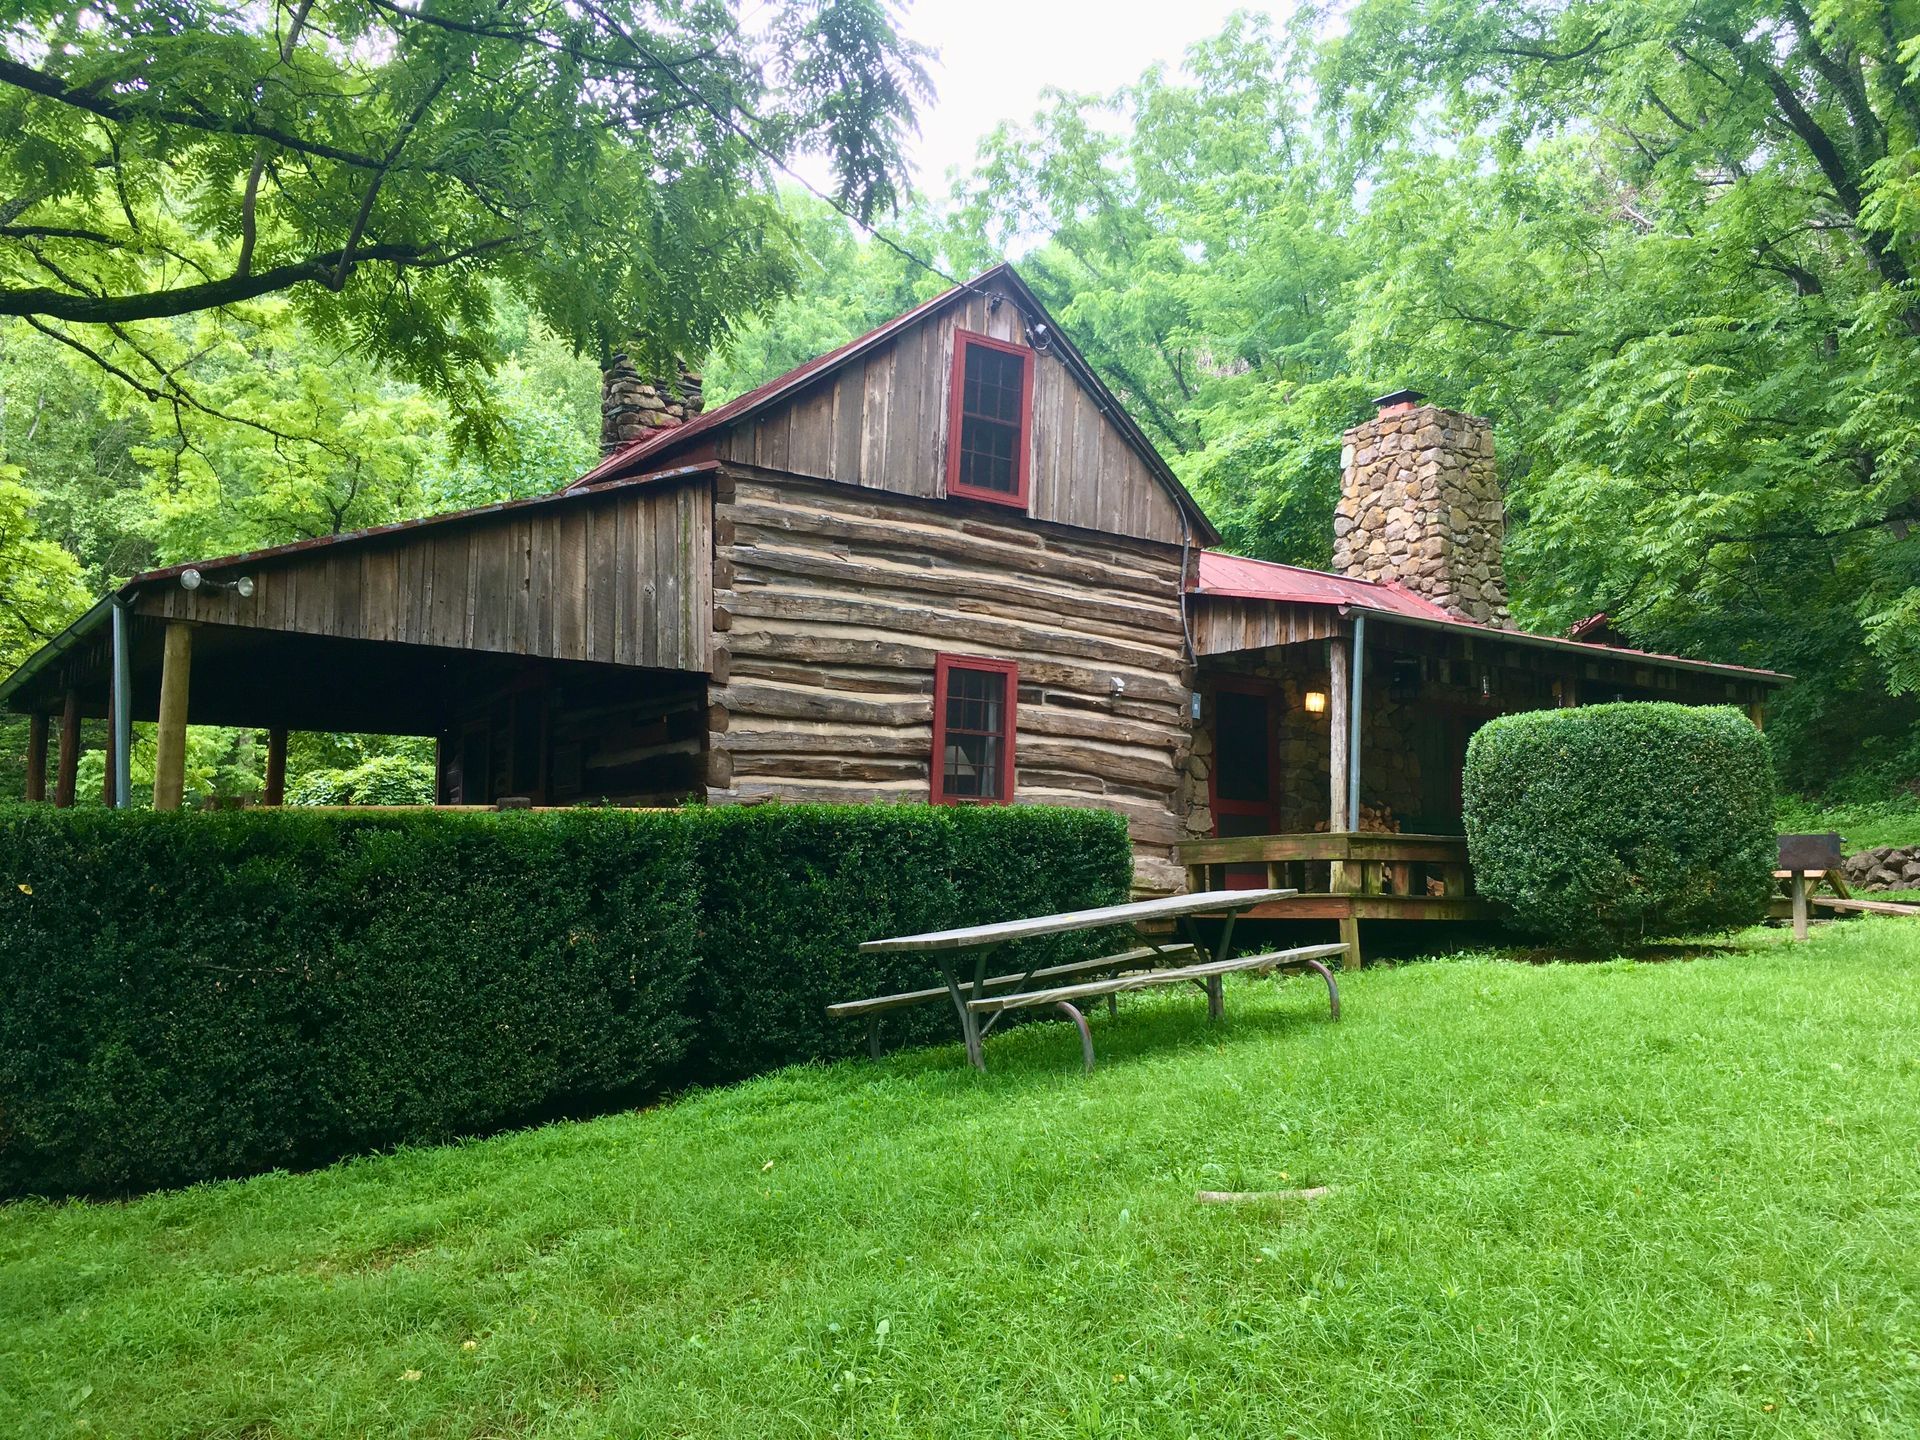 The front view of Vining cabin showing two porches and a wooden picnic table in the grass.